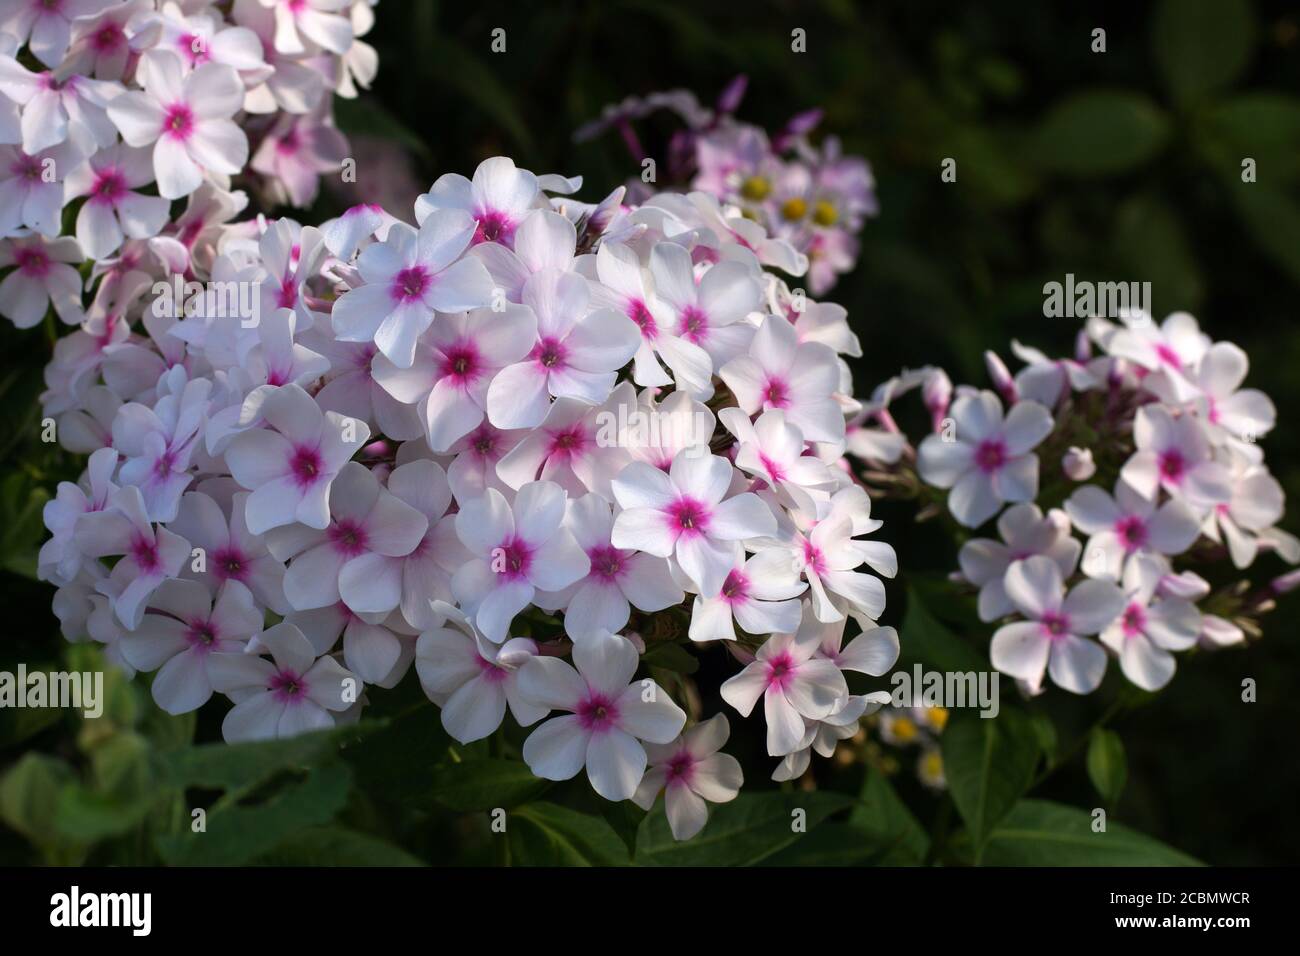 Phlox is white with a pink center in the summer garden. A wonderful outdoor garden plant. Stock Photo